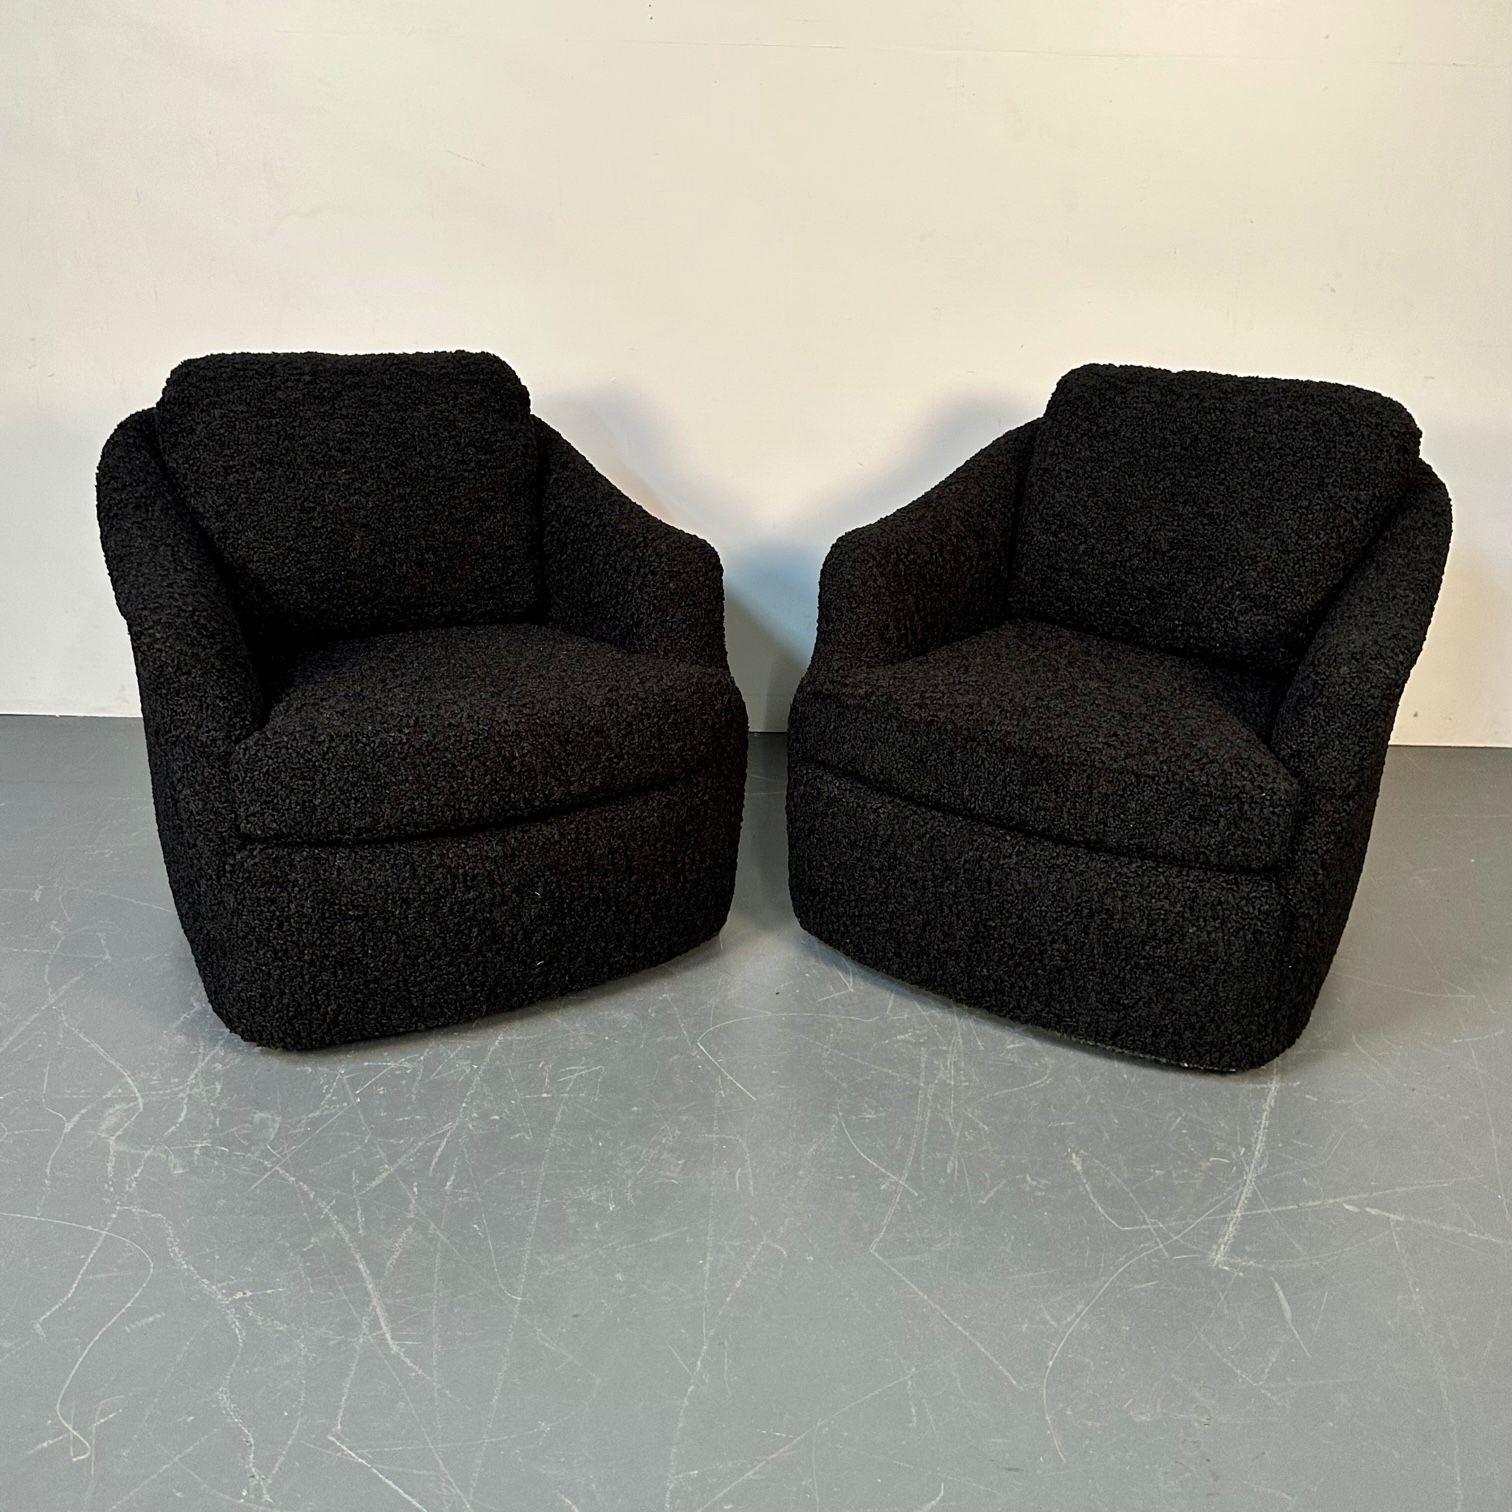 American Pair of Mid-Century Modern Black Bouclé Tub / Swivel / Lounge Chairs, Faux Fur For Sale